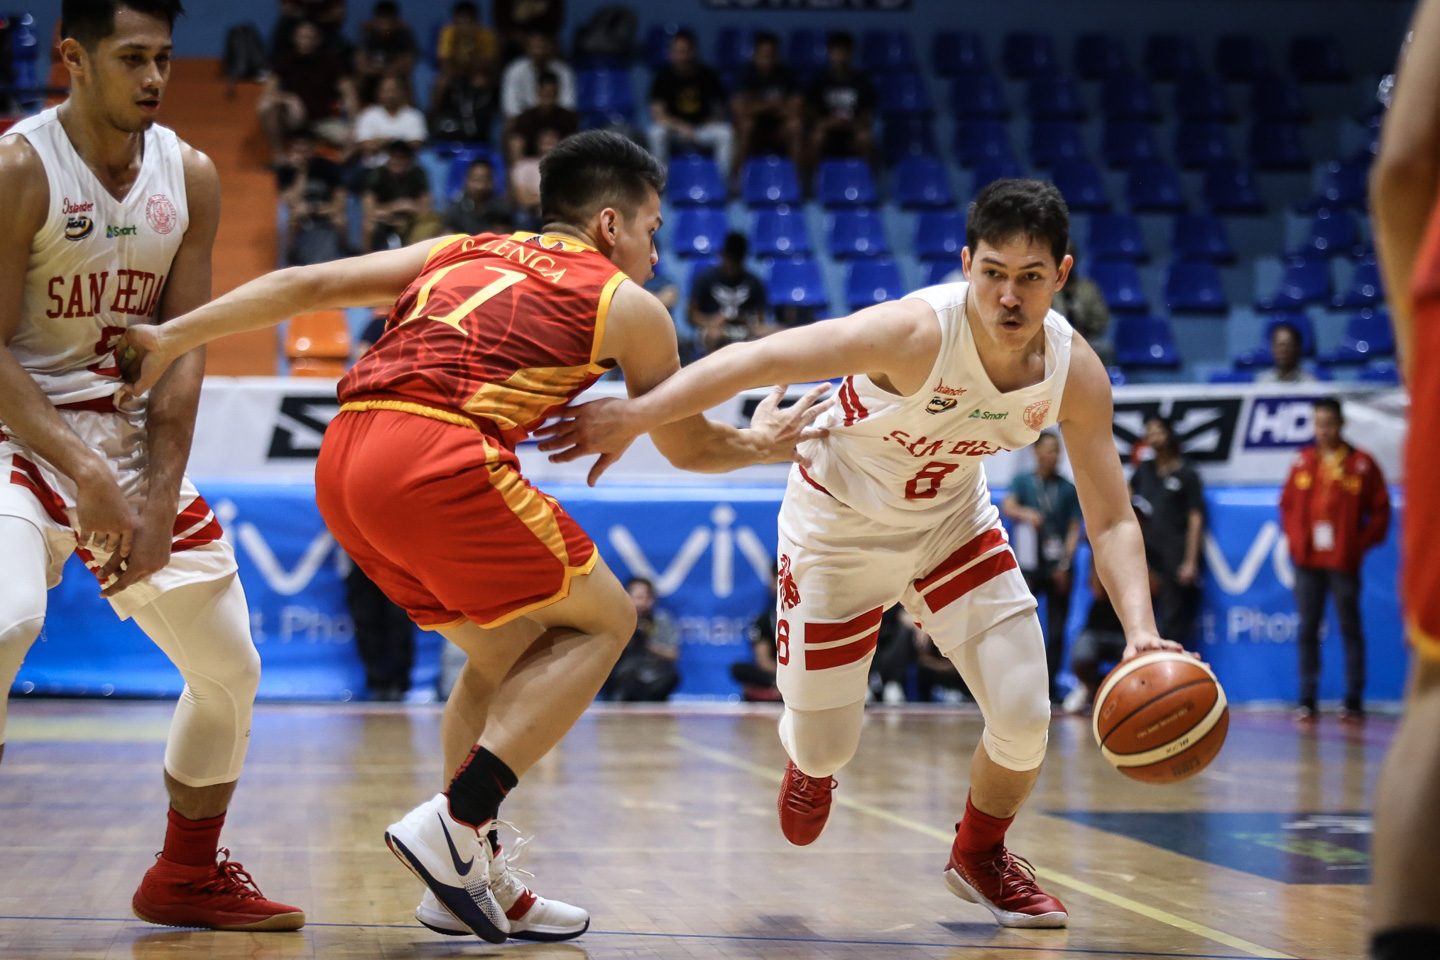 More than a title, San Beda defends tradition in return to NCAA finals